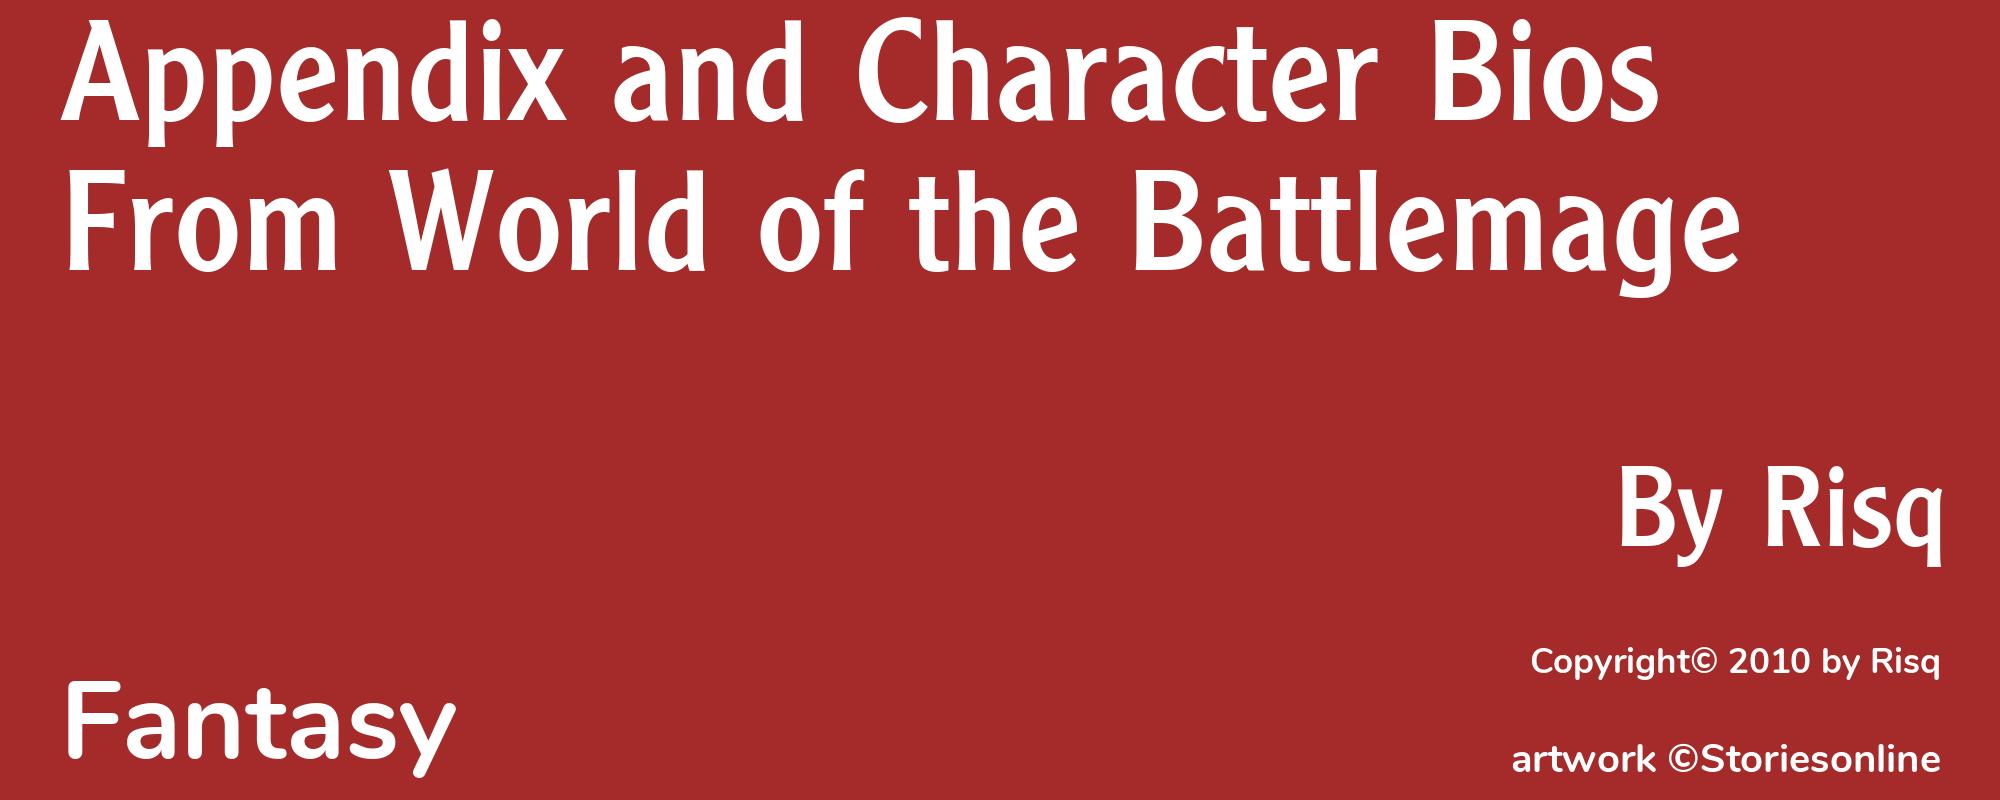 Appendix and Character Bios From World of the Battlemage - Cover